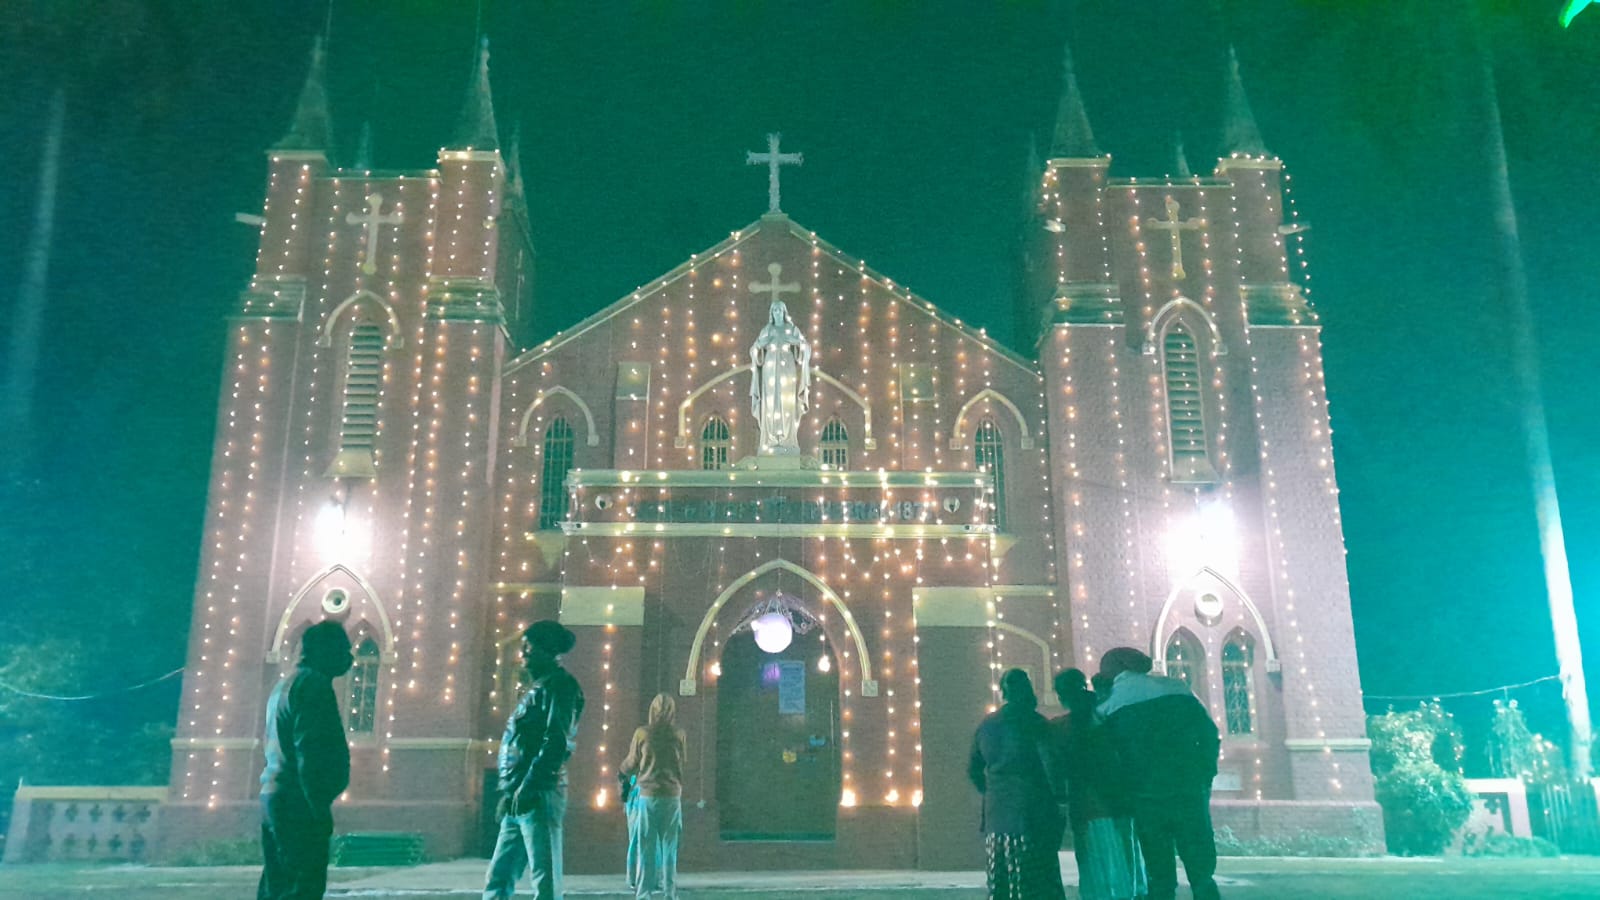 Asansol Sacred Heart Cathedral